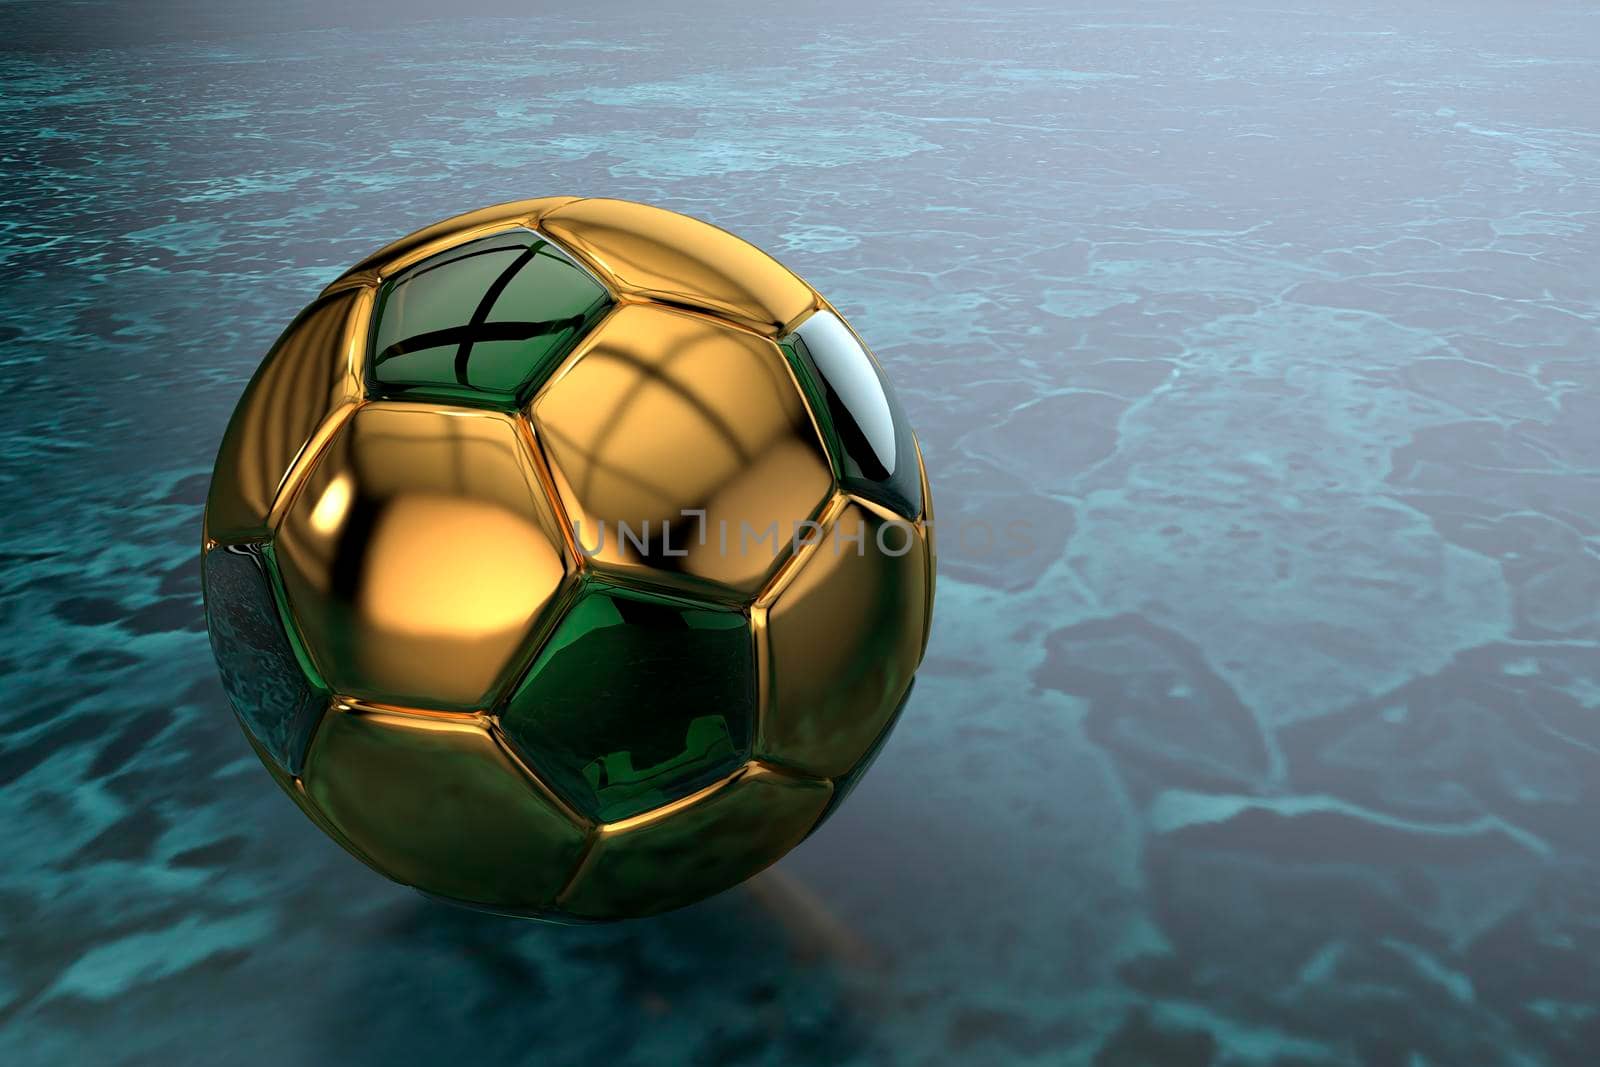 3D golden soccer ball with green glass inserts on a dark background